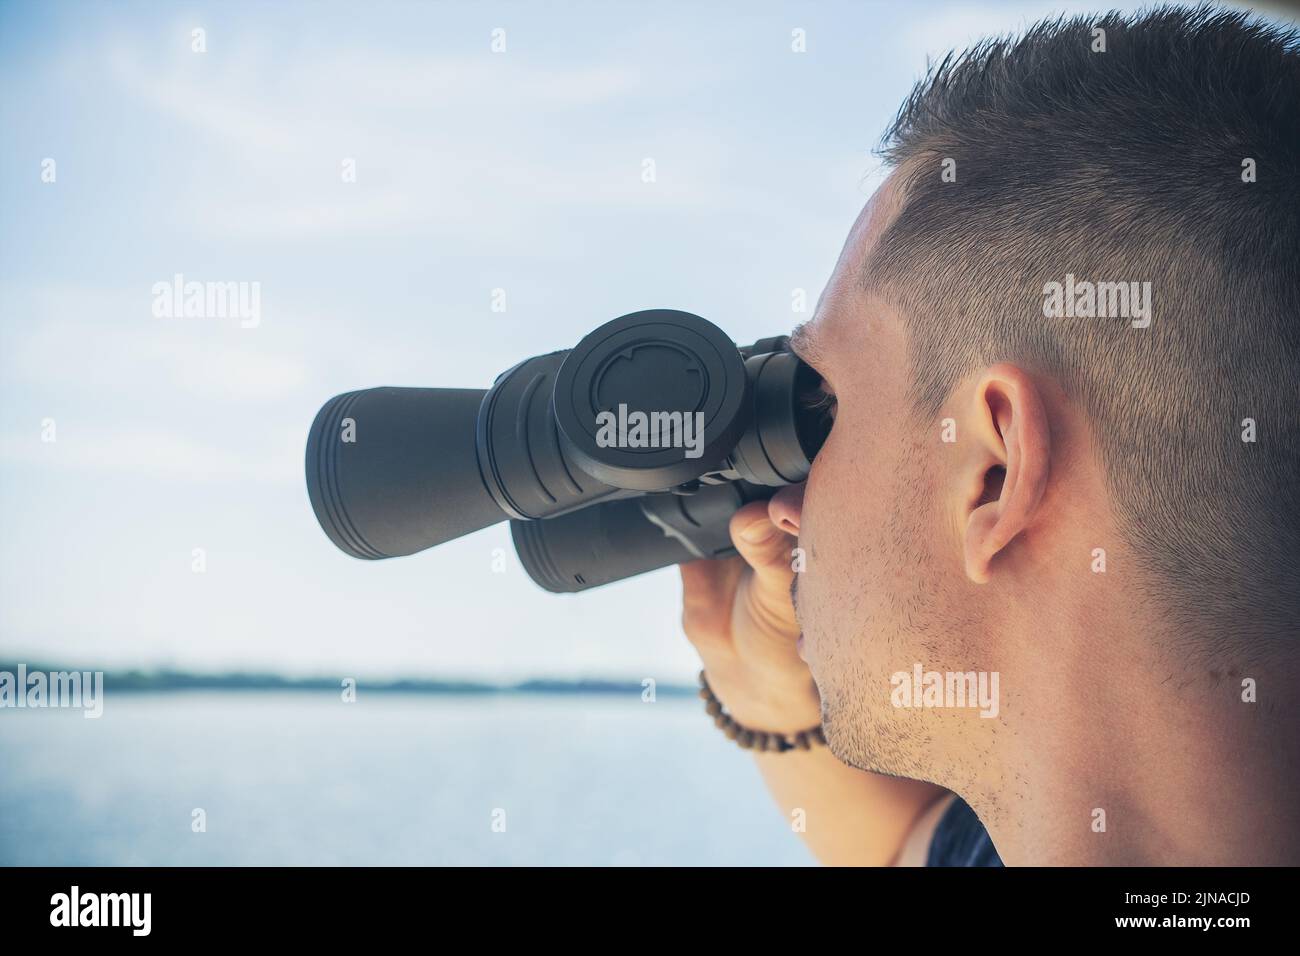 15 June 2021: Young Man Looking Through Binoculars On A Trip By Boat. Boat Trip With Binoculars Stock Photo